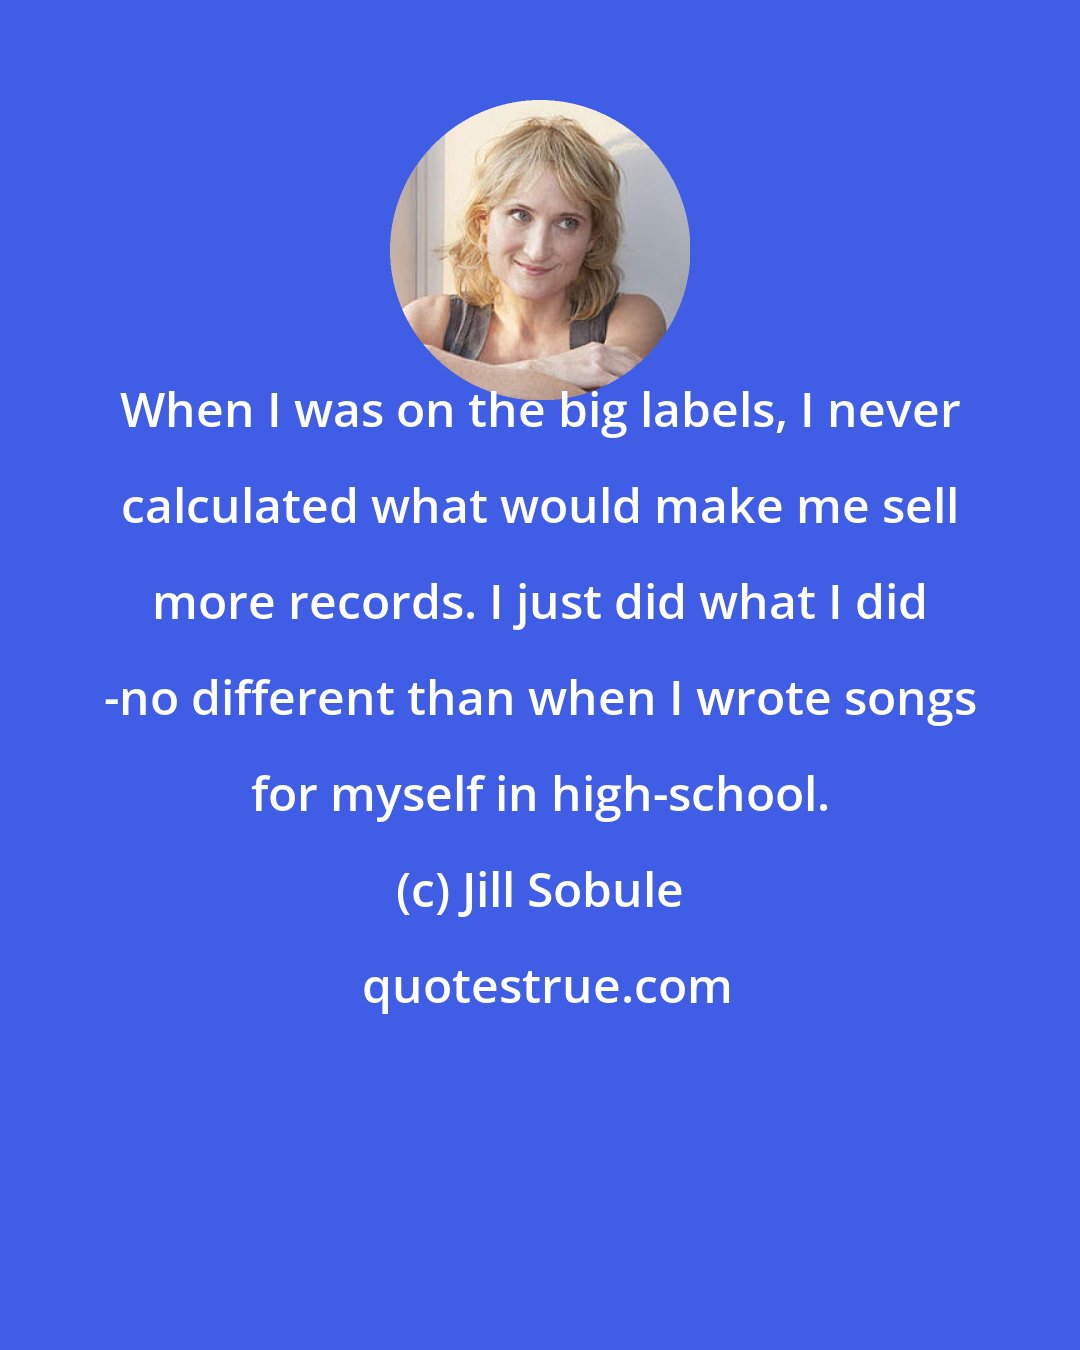 Jill Sobule: When I was on the big labels, I never calculated what would make me sell more records. I just did what I did -no different than when I wrote songs for myself in high-school.